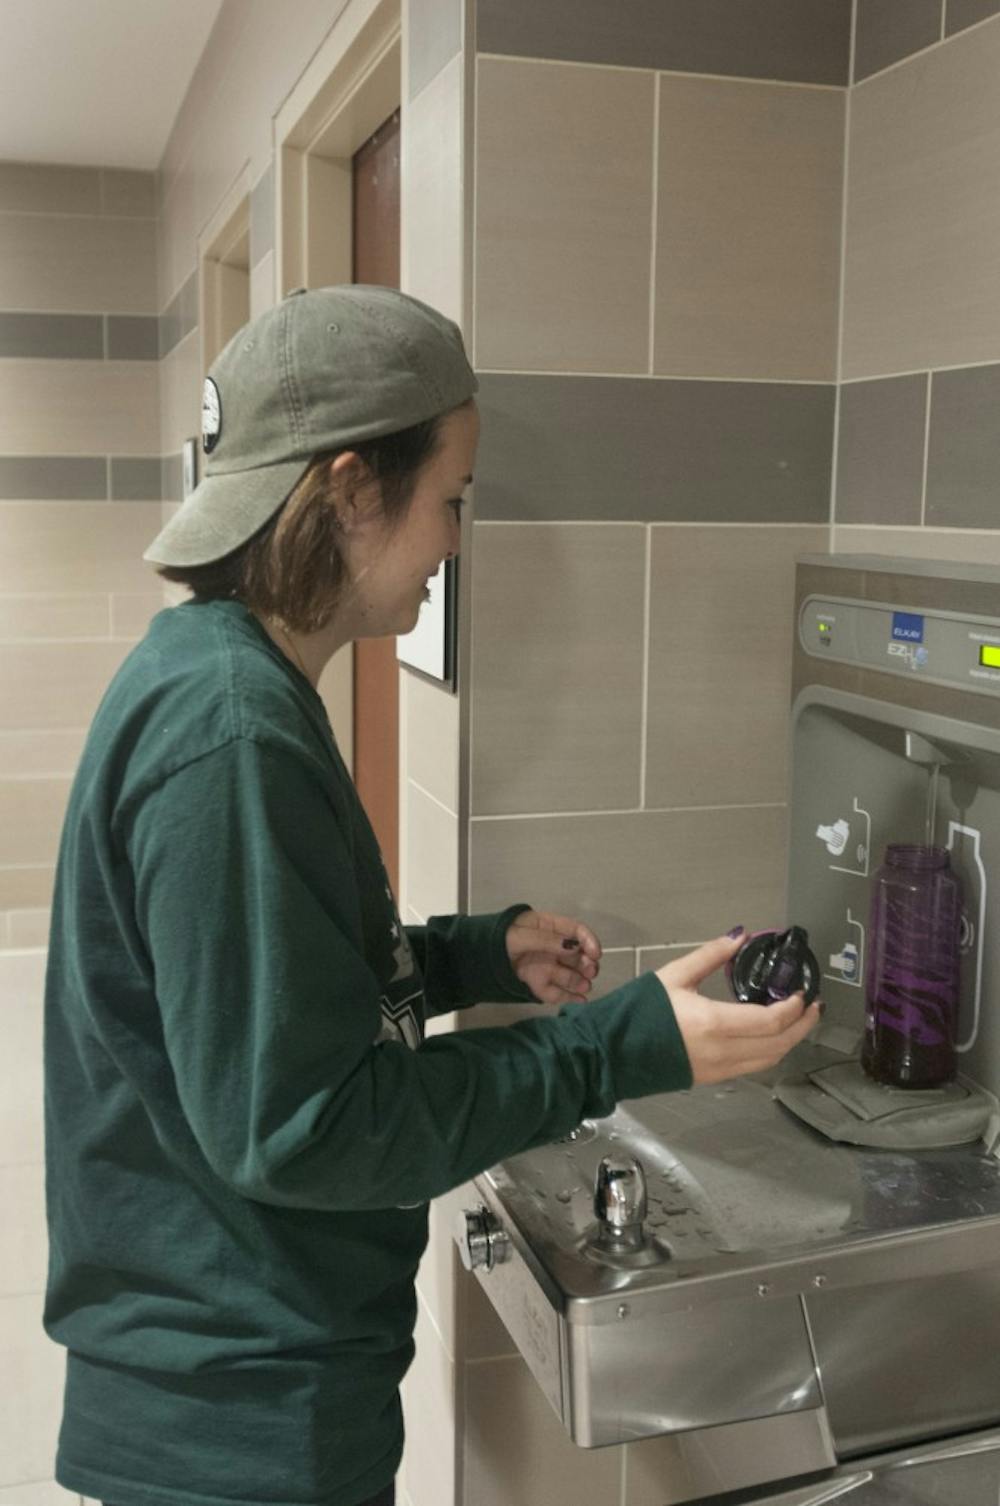 Human biology junior Nina Rackerby fills her water bottle at a drinking fountain in the Union. Rackerby said she had used fountains like this one on campus before.